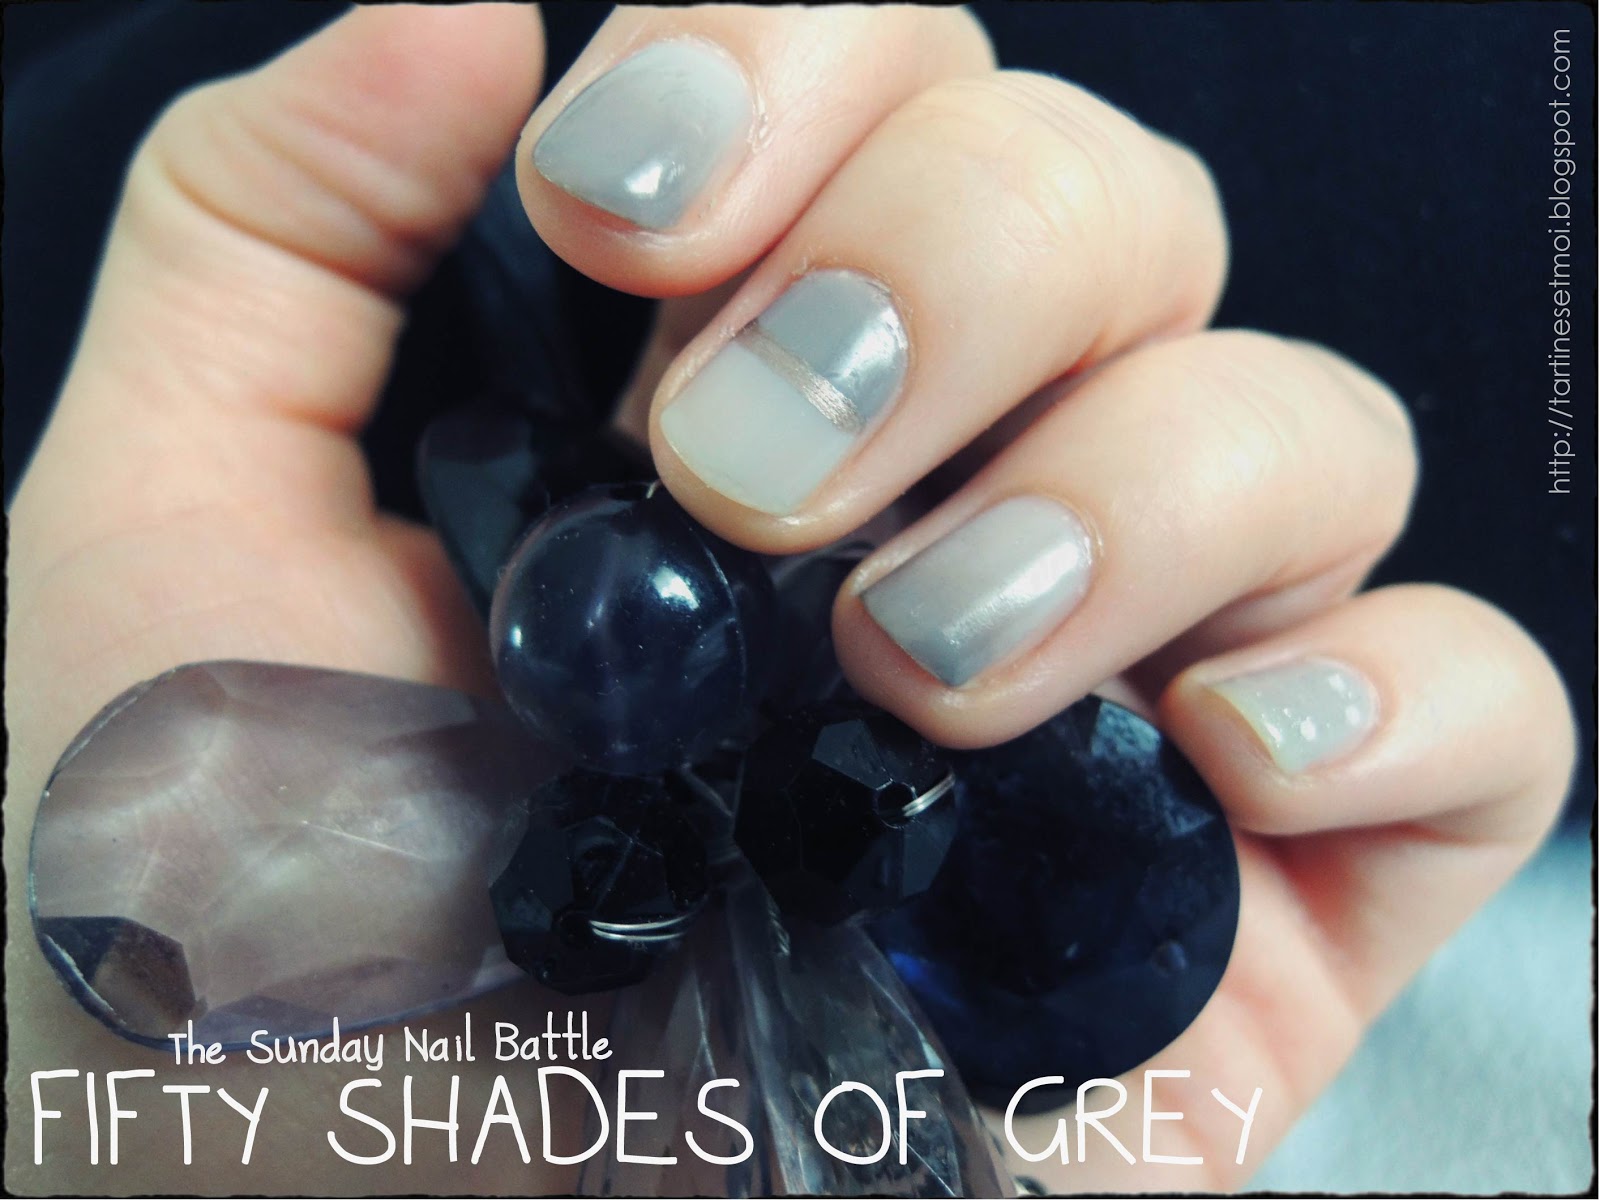 4. "Fifty Shades of Grey" Nail Art Inspiration - wide 6